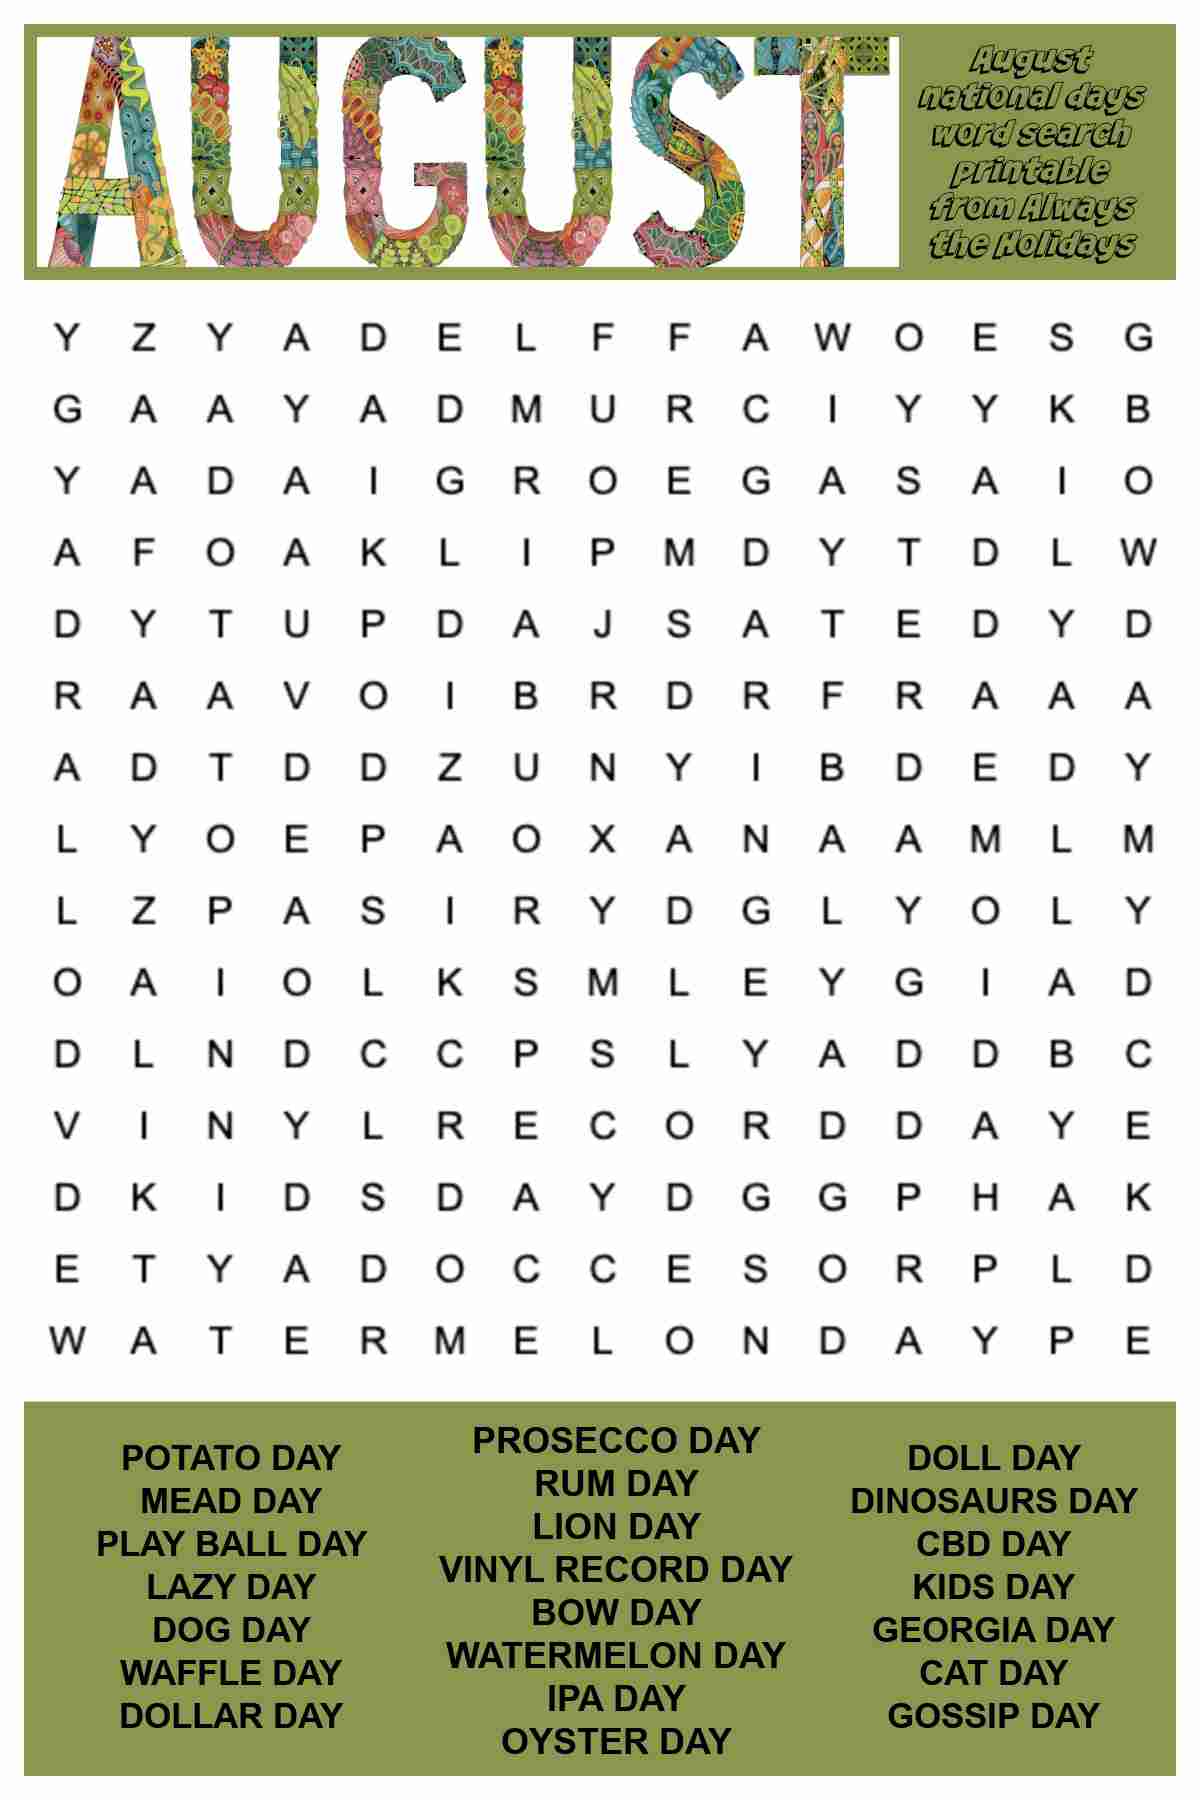 An August word search printable with the word "August" at the top made from colorful shapes, a word find in the middle, and a word bank over a green background at the bottom of the image.